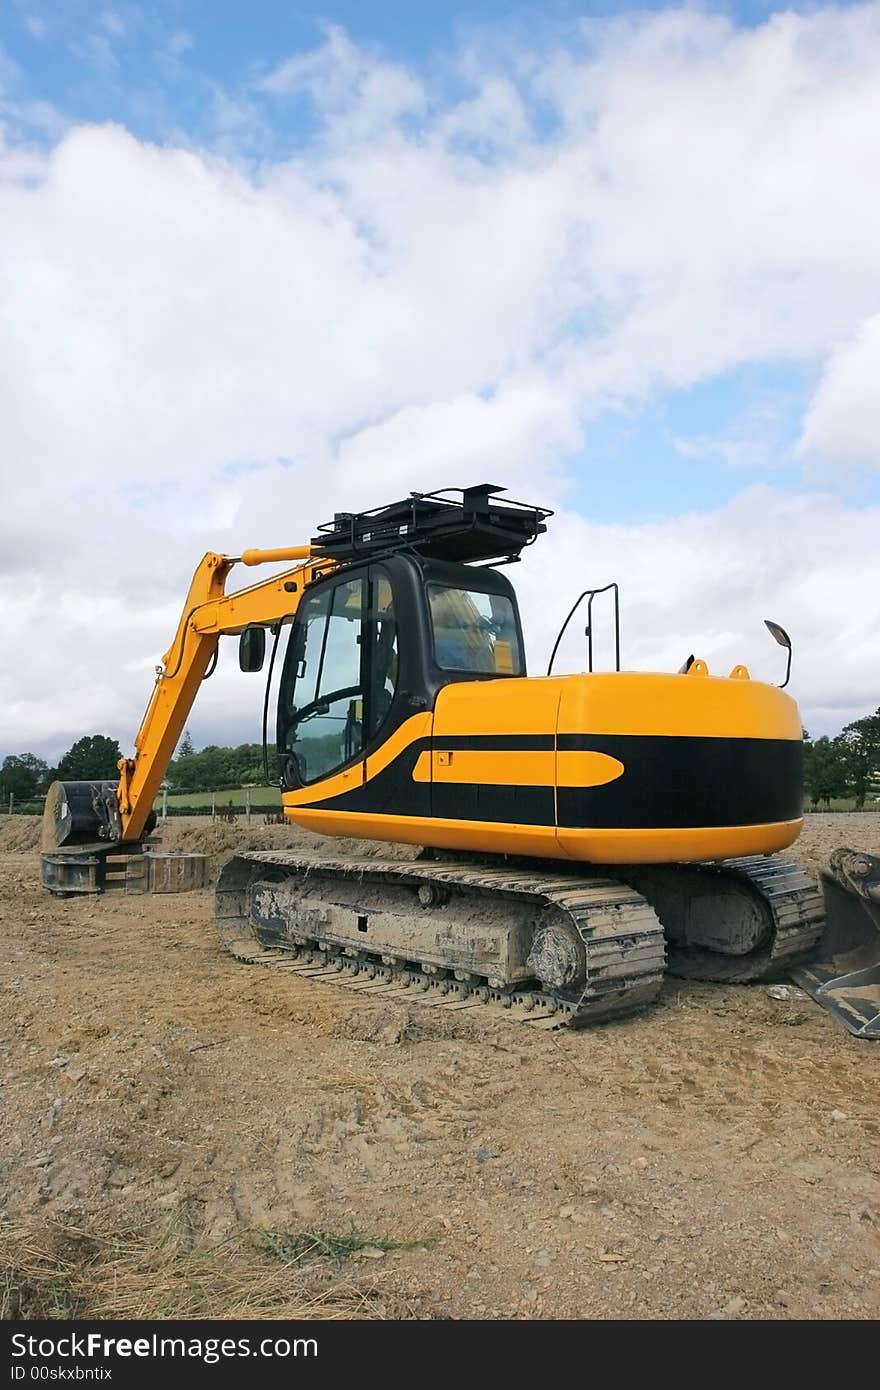 Rear view of a yellow industrial digger standing idle on rough ground. Rear view of a yellow industrial digger standing idle on rough ground.